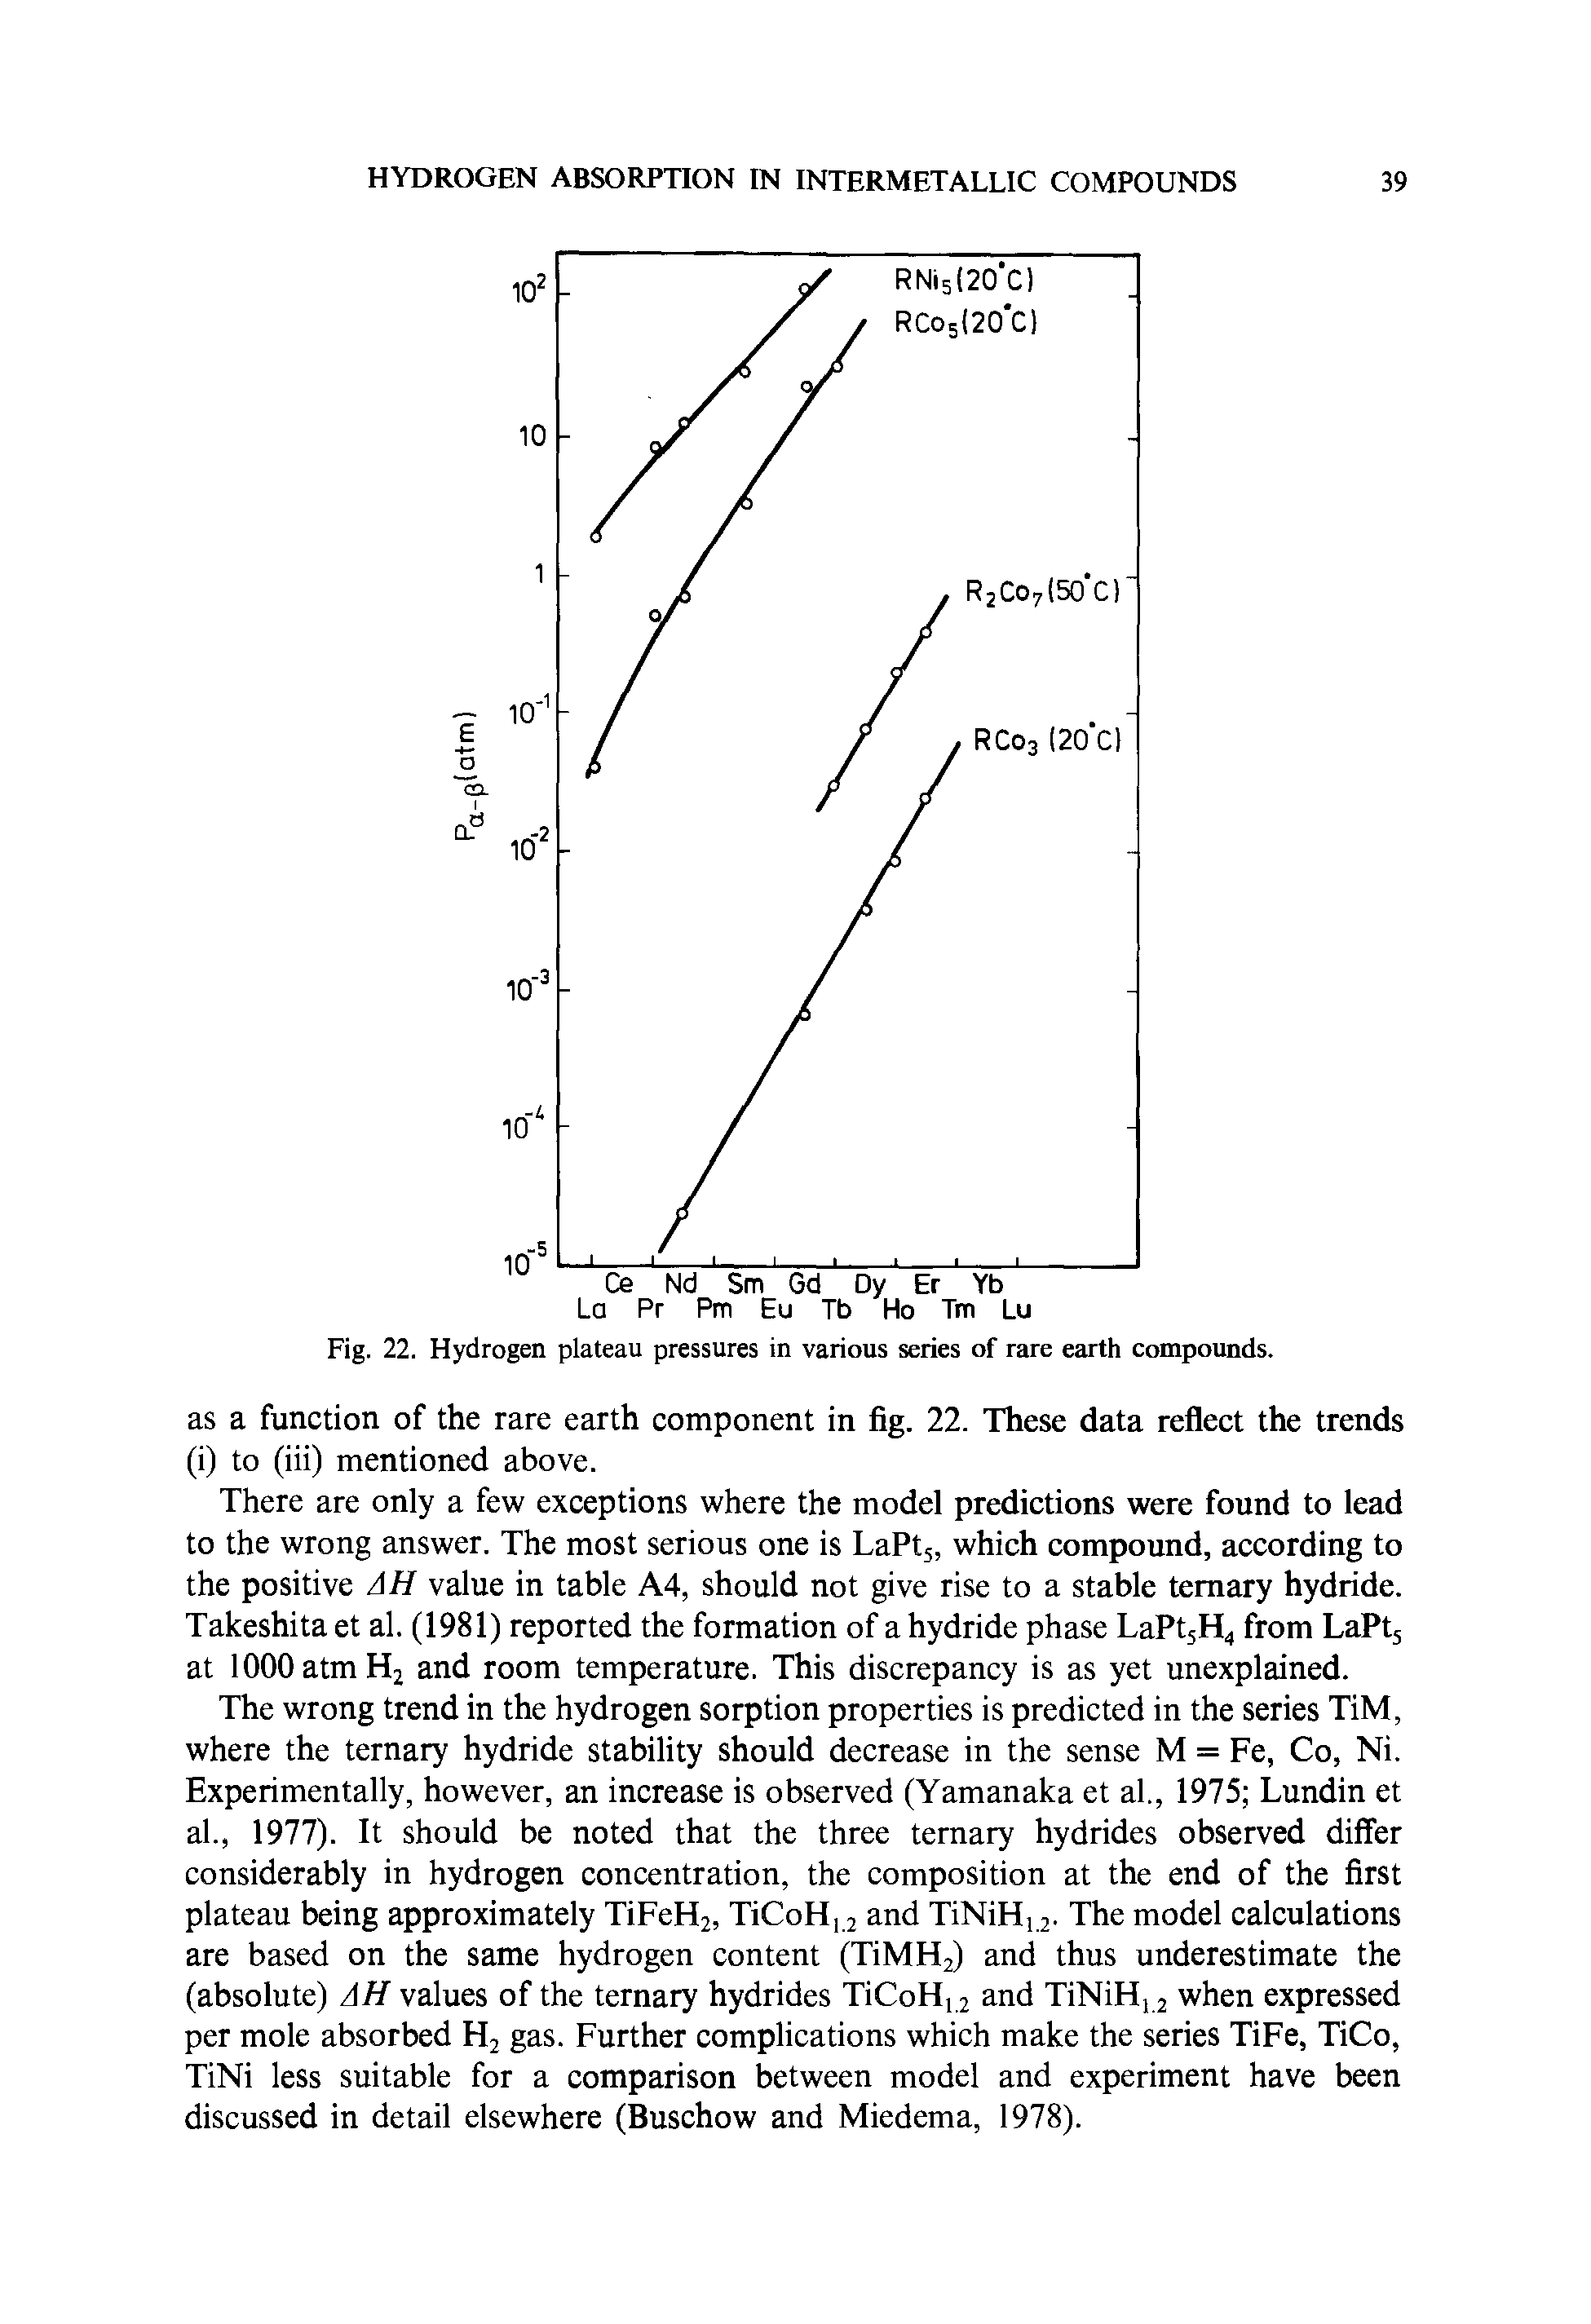 Fig. 22. Hydrogen plateau pressures in various series of rare earth compounds.